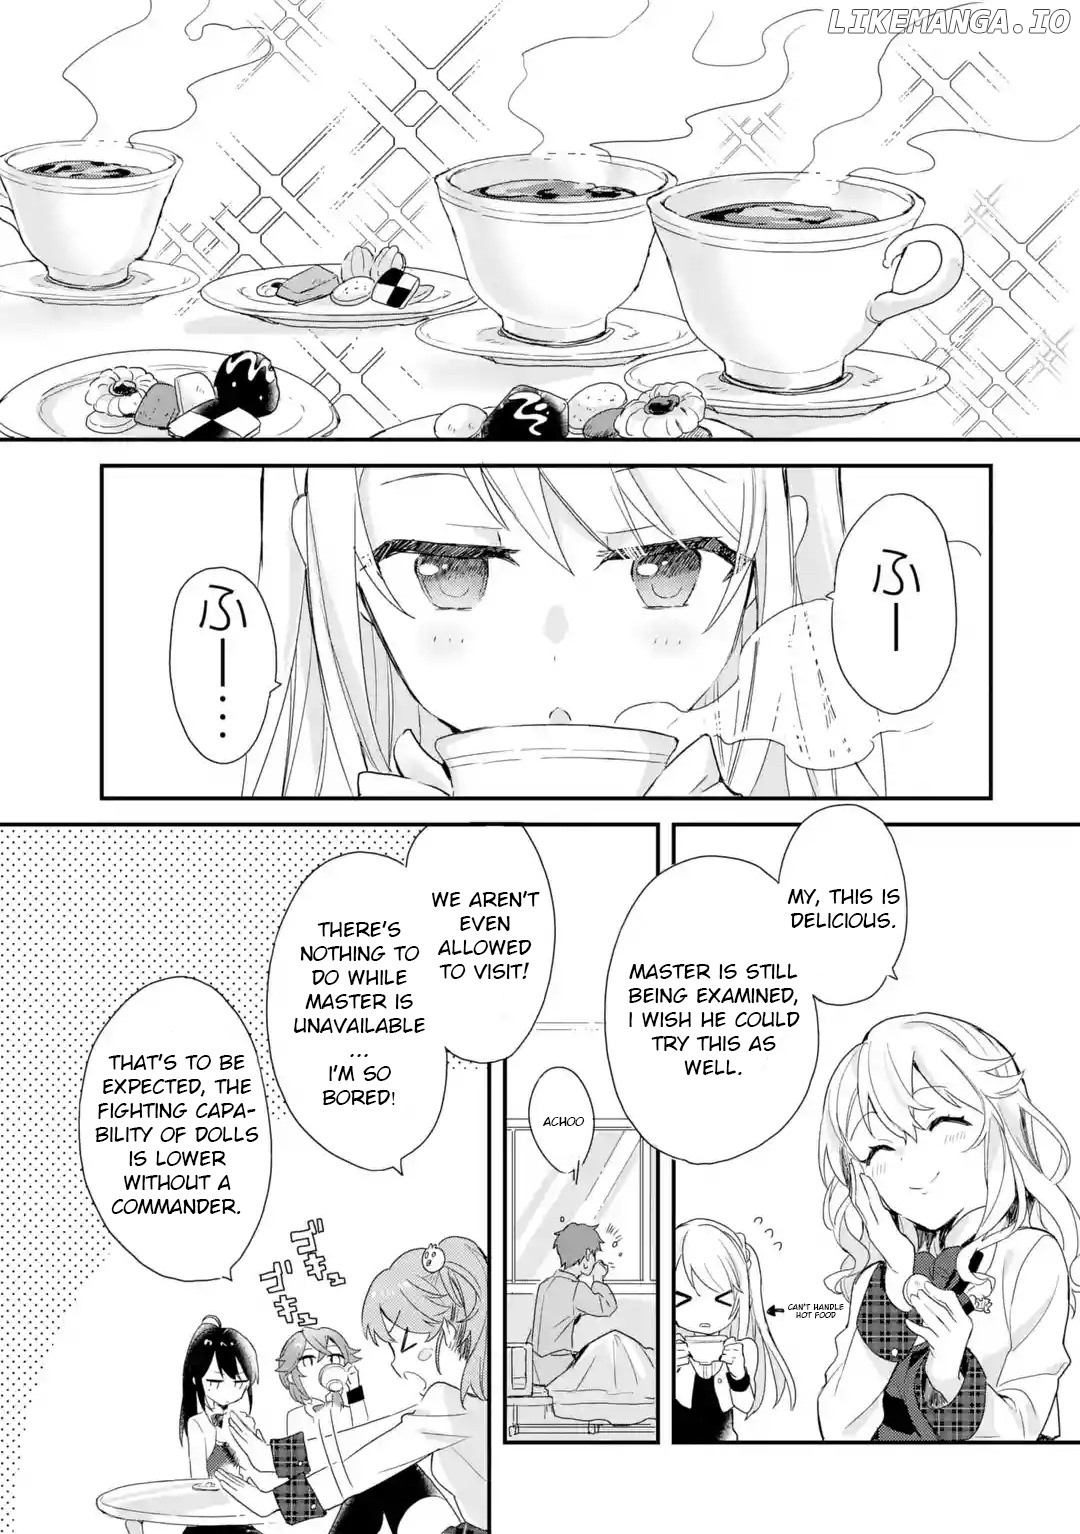 Project Tokyo Dolls - Forgotten Imitation Doll chapter 3 - page 4